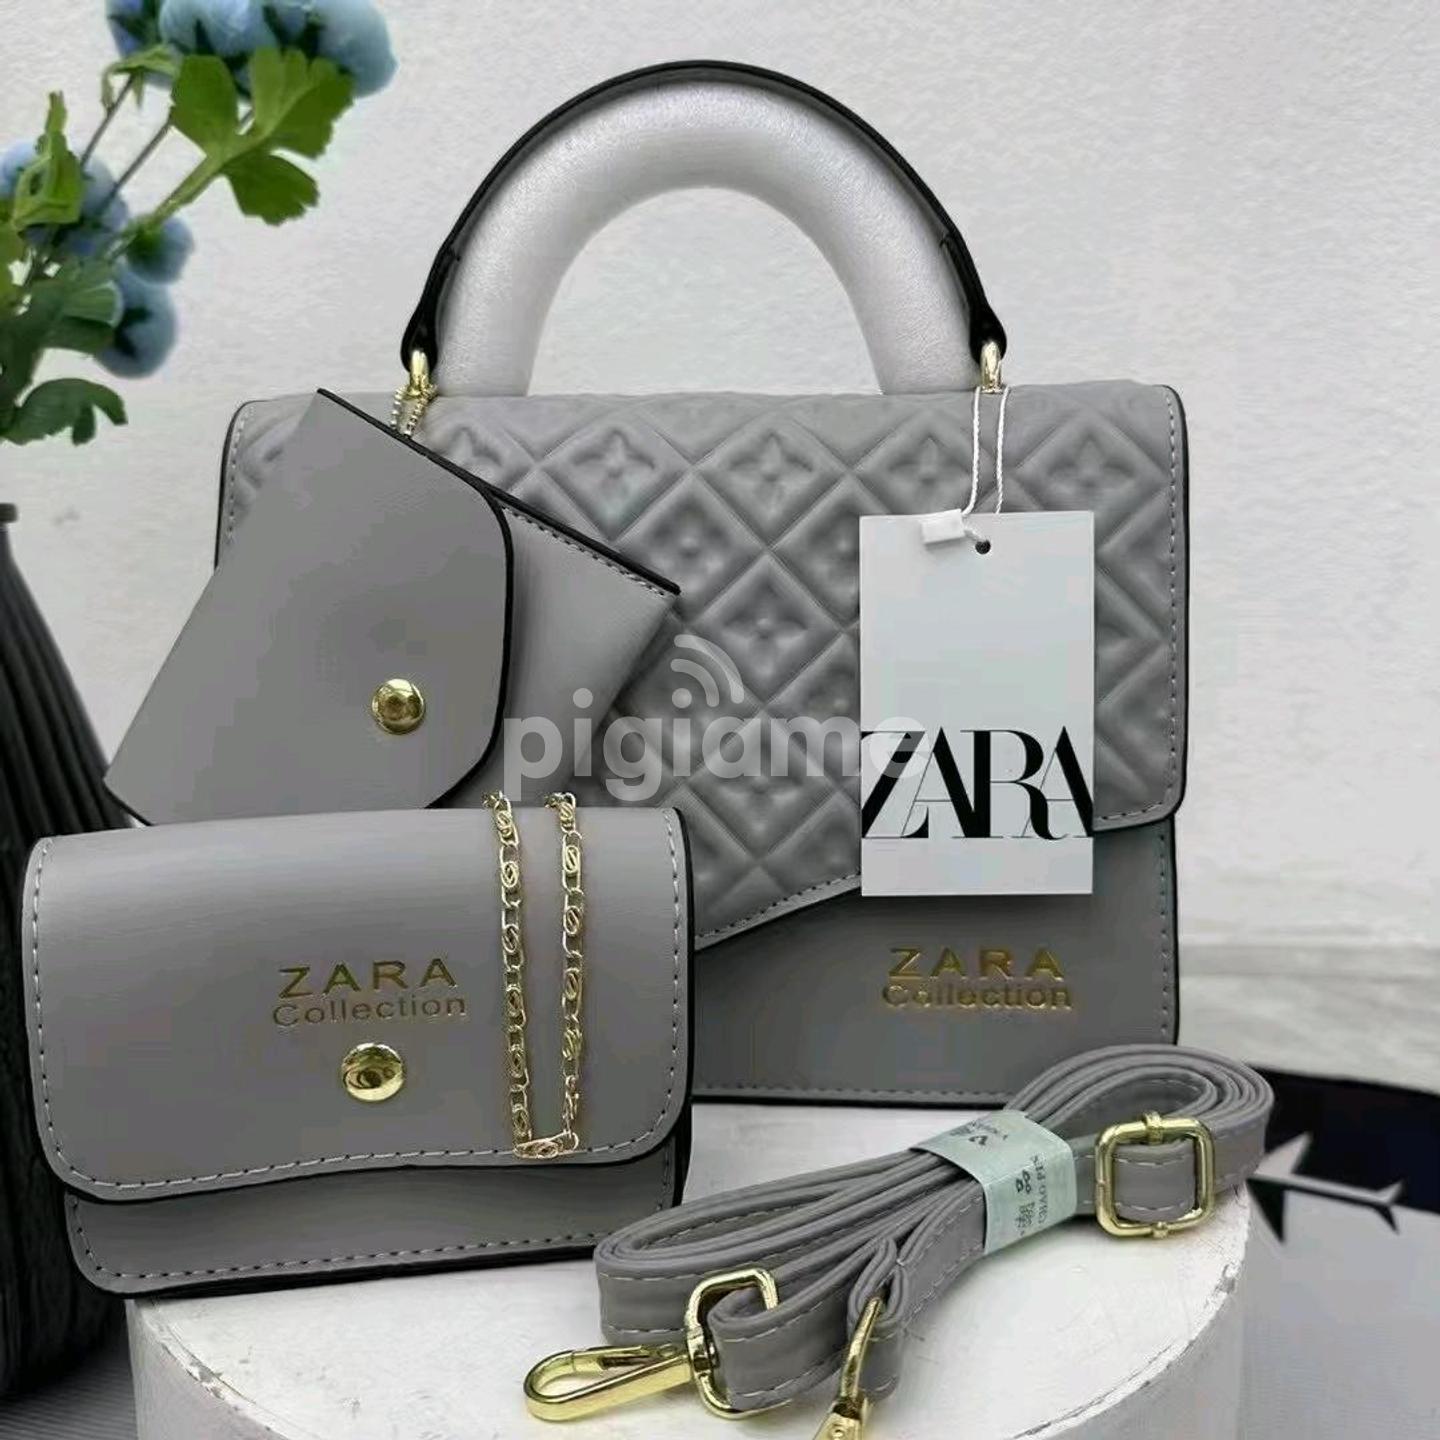 Zara combo of 7 For booking... - Wholsaler of ladies purse | Facebook